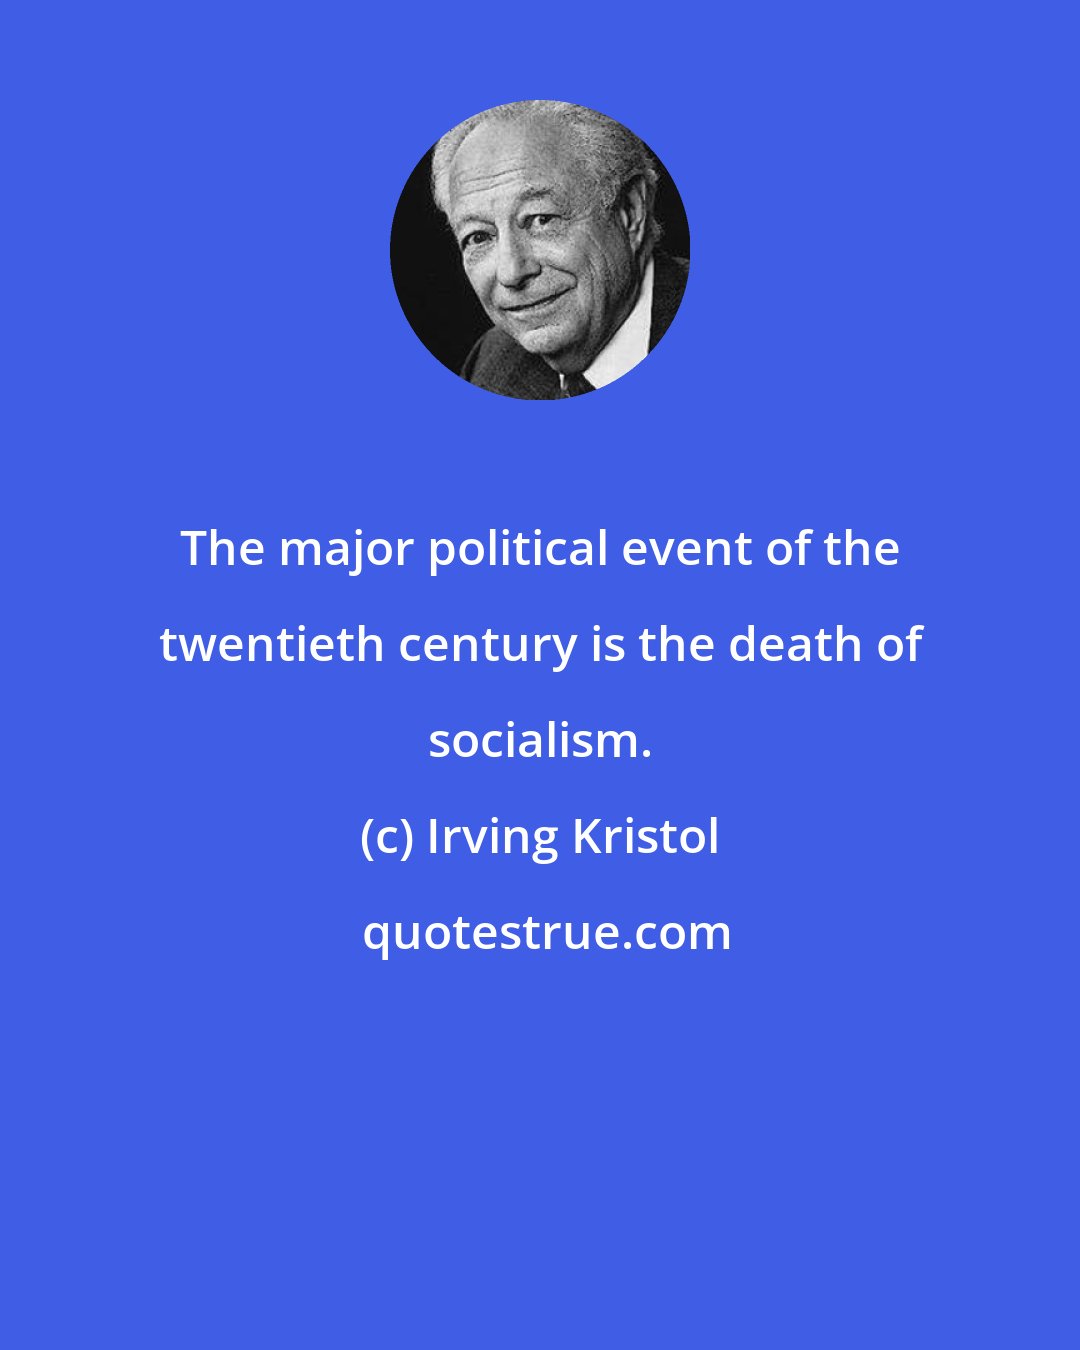 Irving Kristol: The major political event of the twentieth century is the death of socialism.